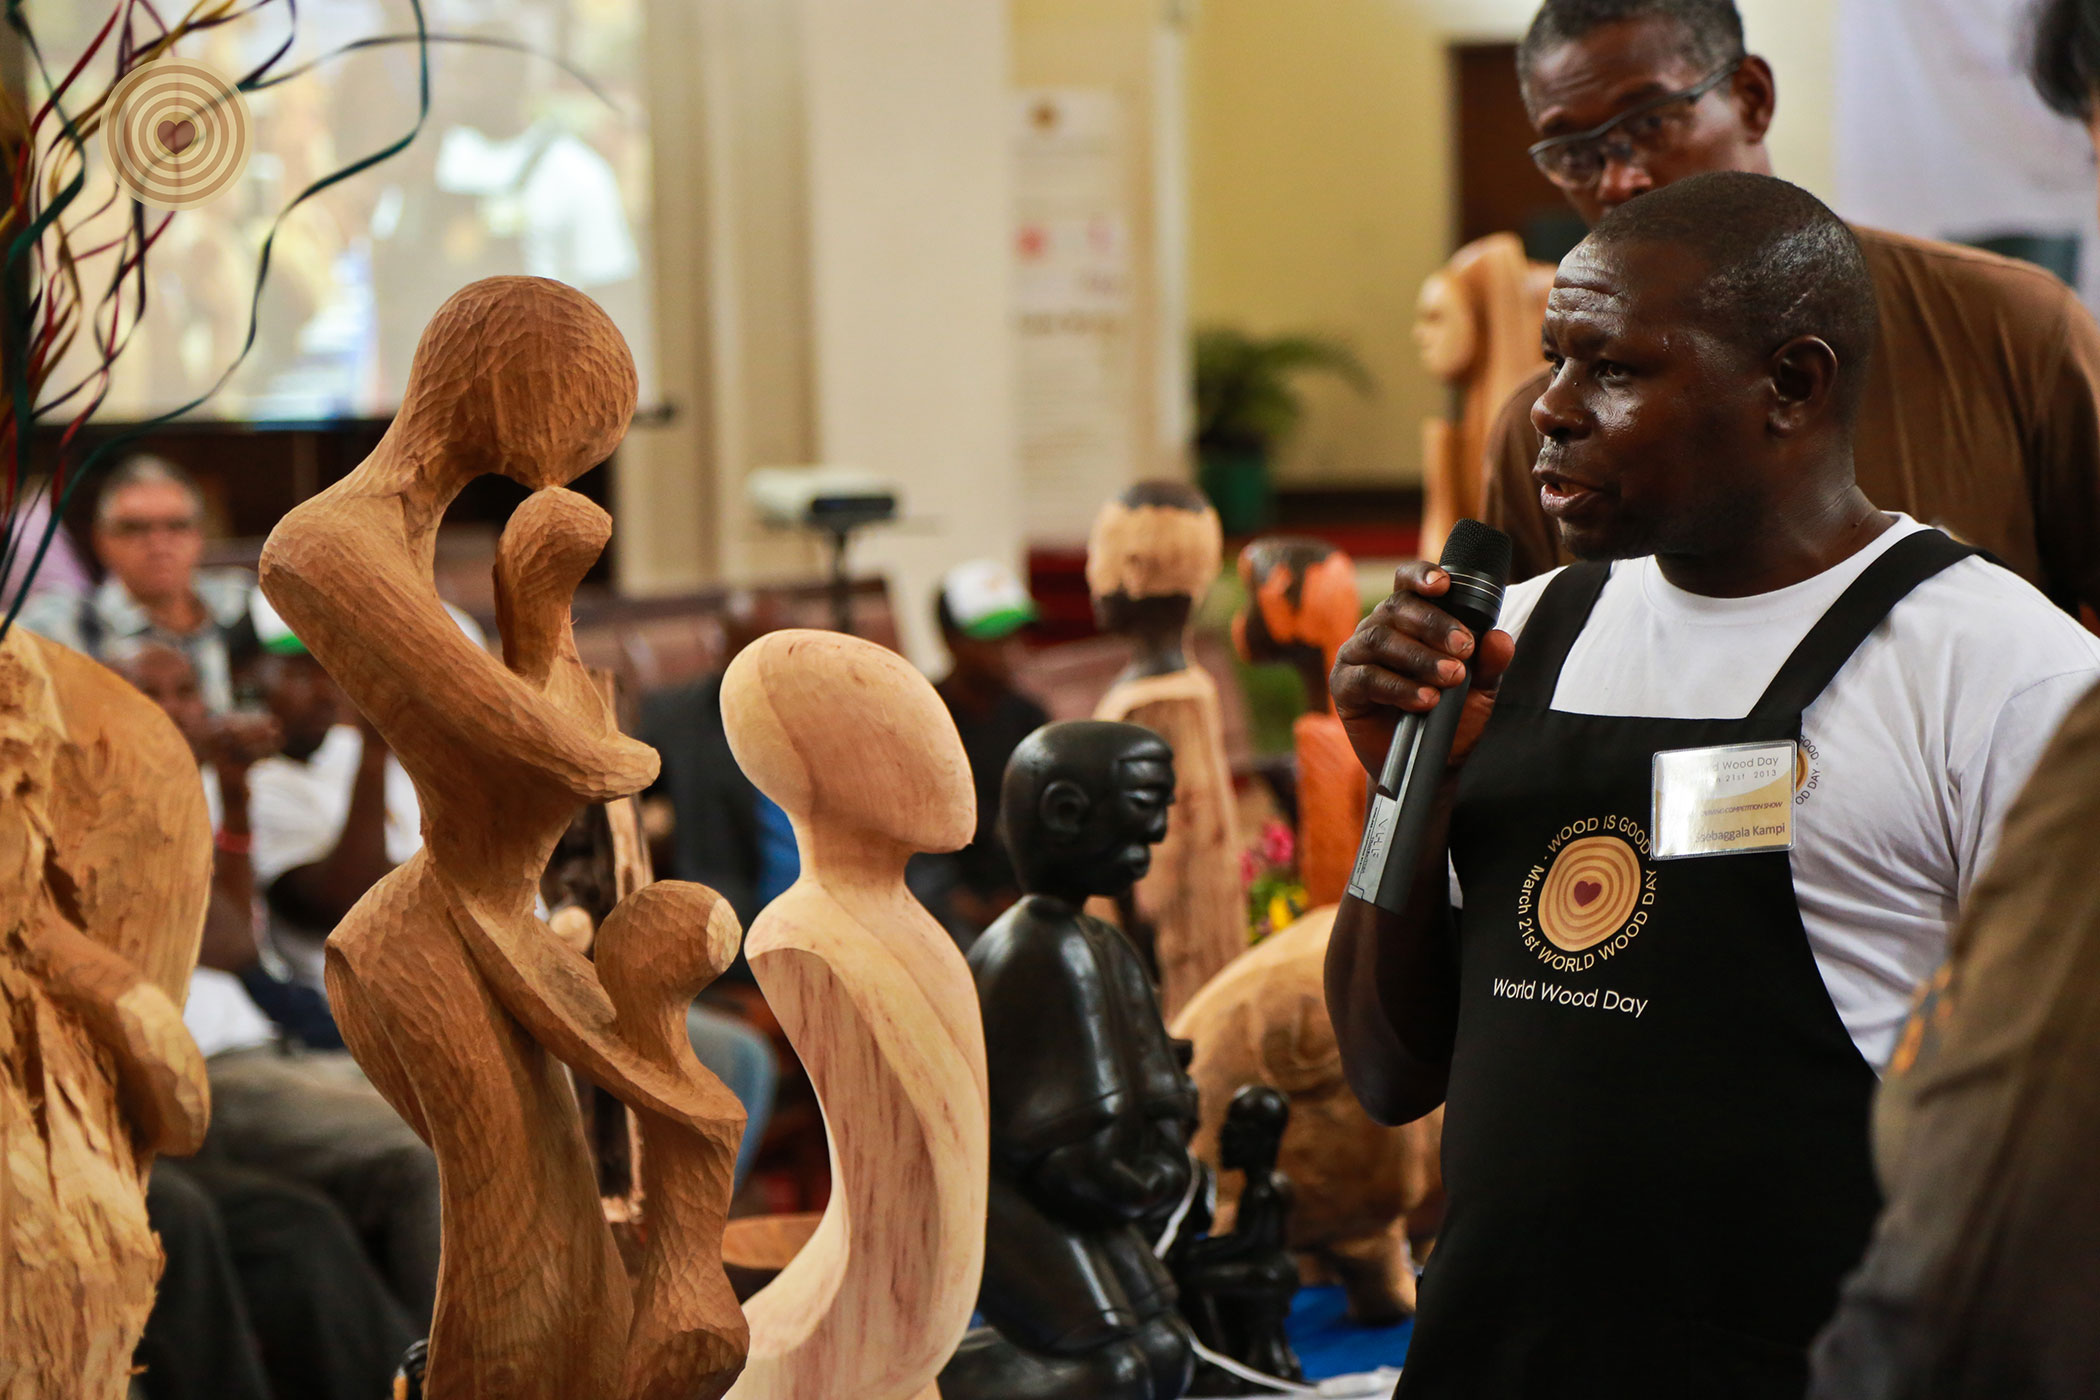 2013 World Wood Day, International Woodcarving Show